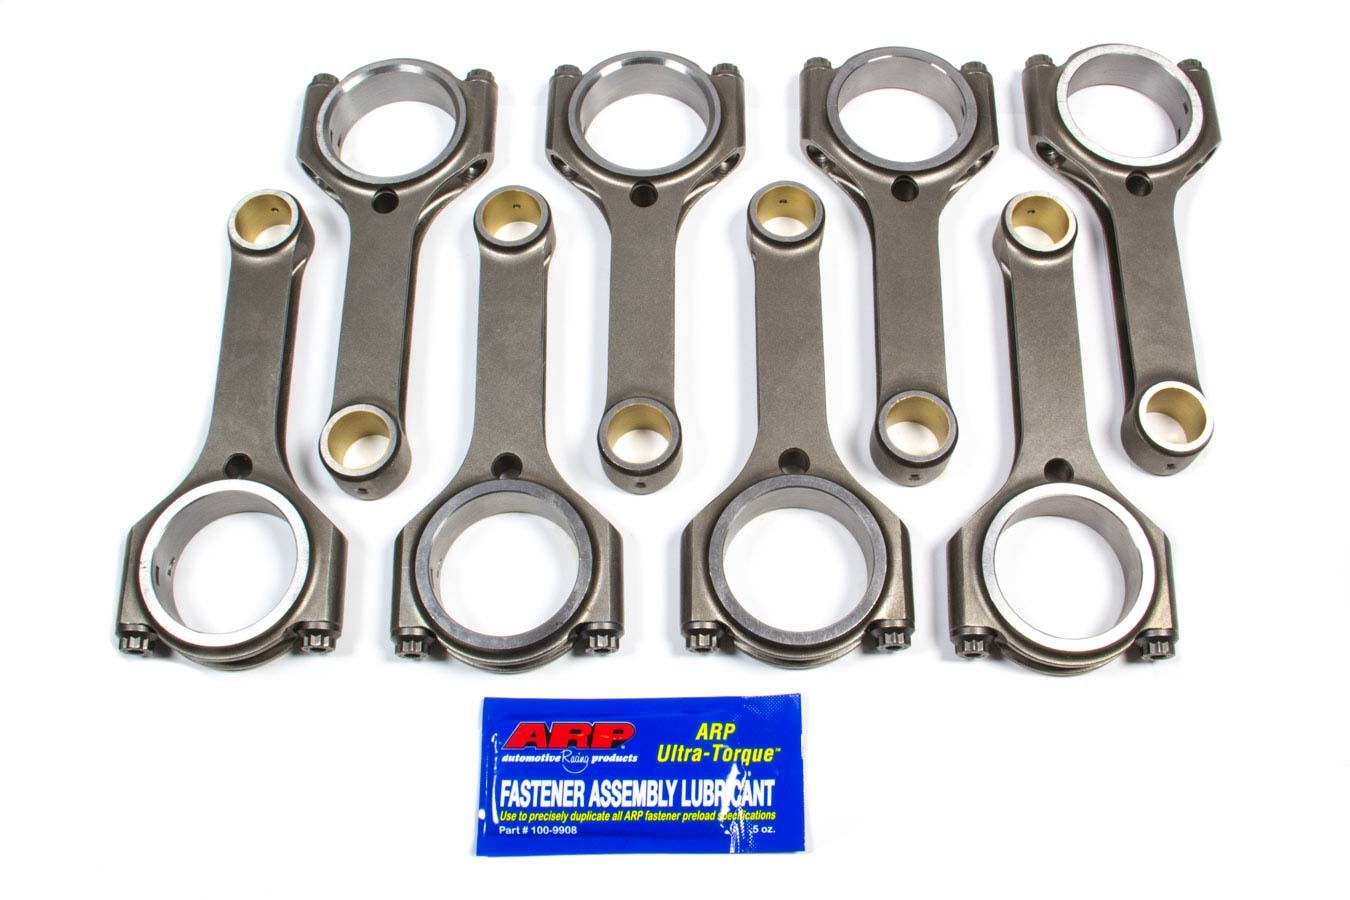 Scat 2-350-5850-2000-QLS - Connecting Rod, Ultra Q-Lite, H Beam, 5.850 in Long, Bushed, 7/16 in Cap Screws, ARP8740, Forged Steel, Small Block Chevy, Set of 8